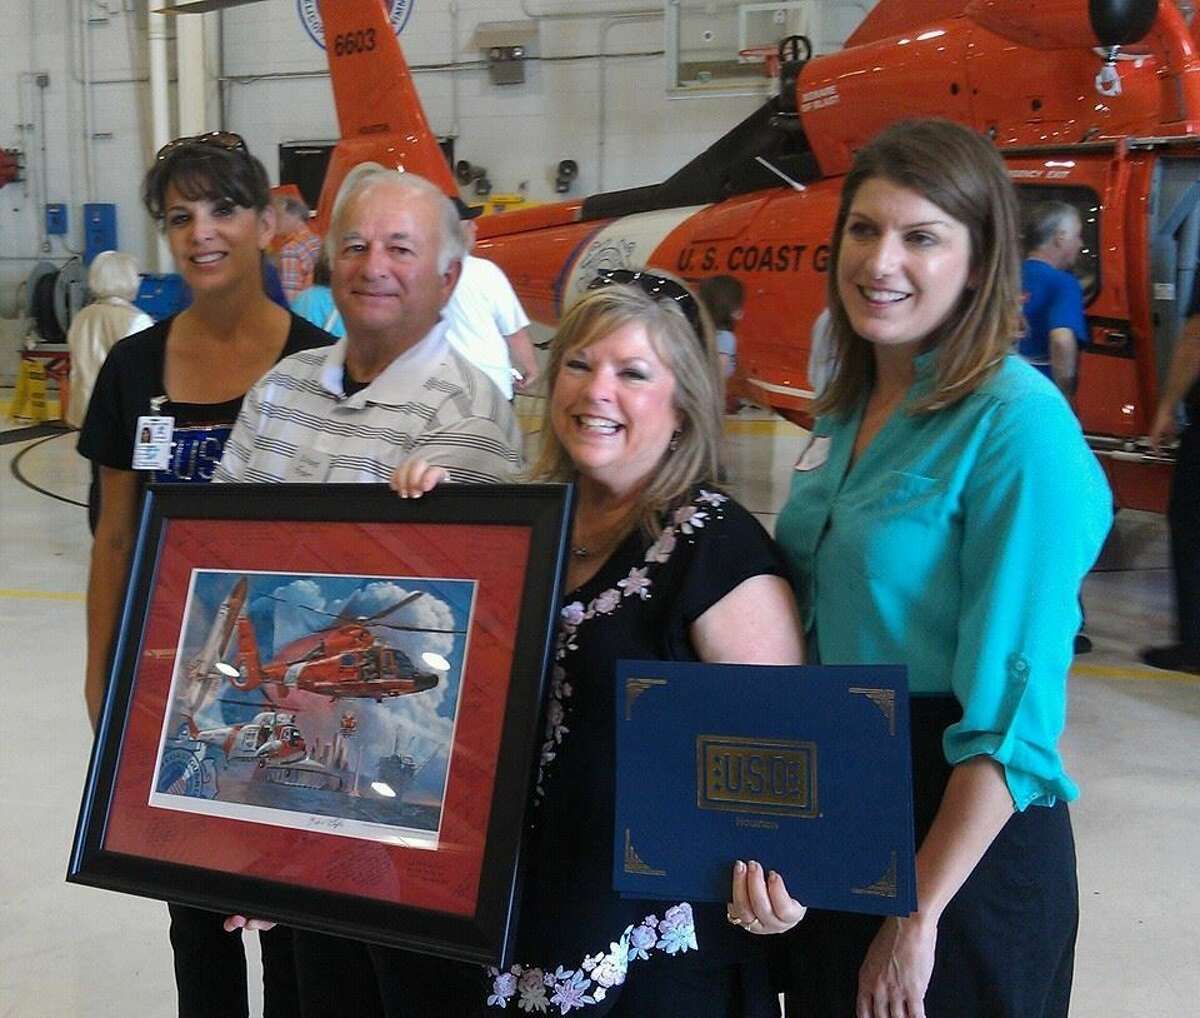 U.S. Coast Guard Air Station Houston Executive Officer, Commander Christopher Hulser, spoke to the volunteers about what their service means to troops and military family members before presenting a lithograph to USO Houston Volunteers of the Year, Richard and Nancy Foisner.